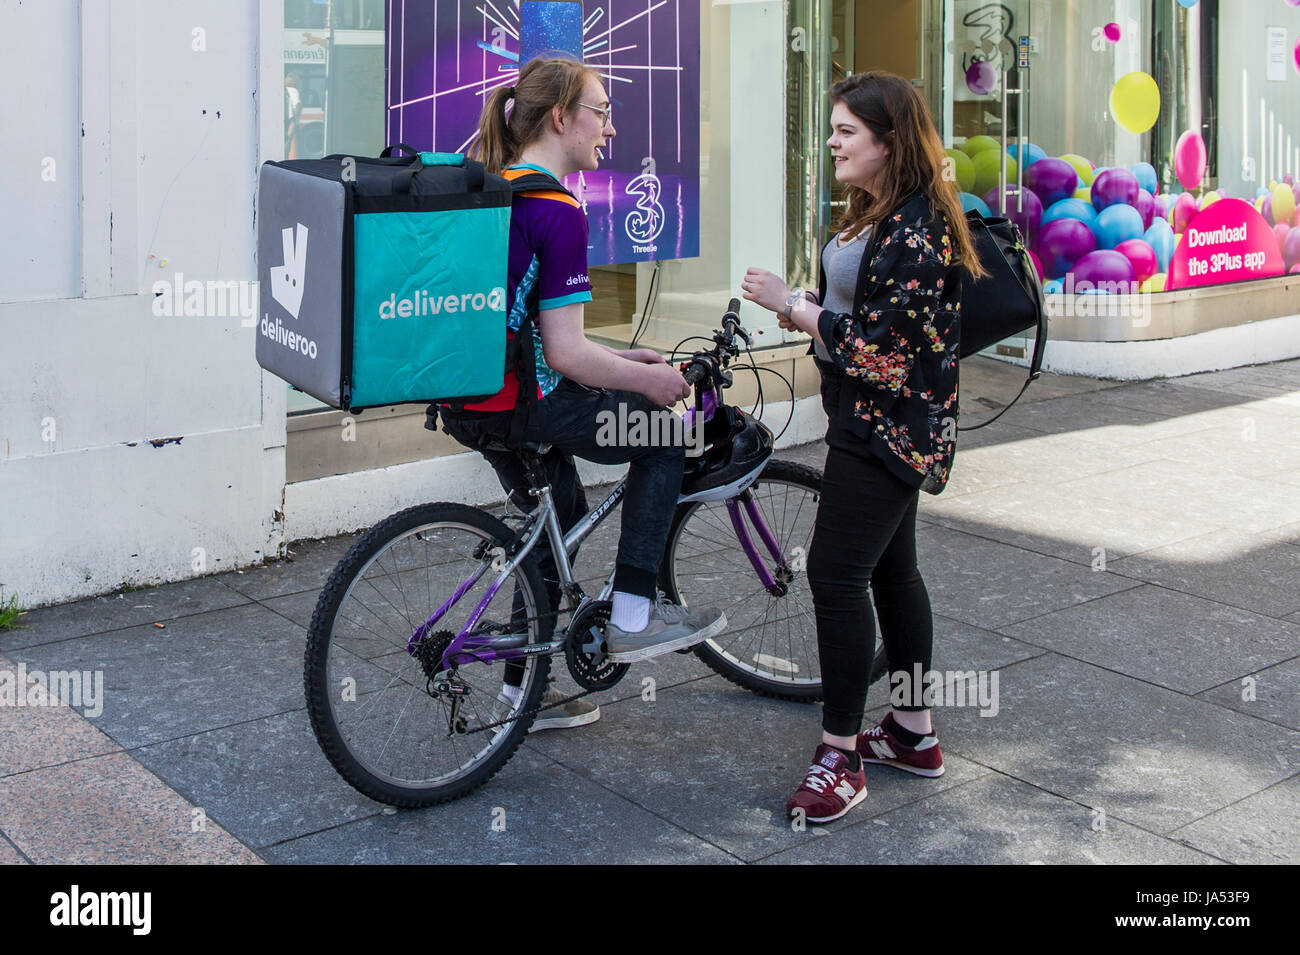 Deliveroo female delivery rider chatting to a friend during a break in Cork, Ireland. Stock Photo